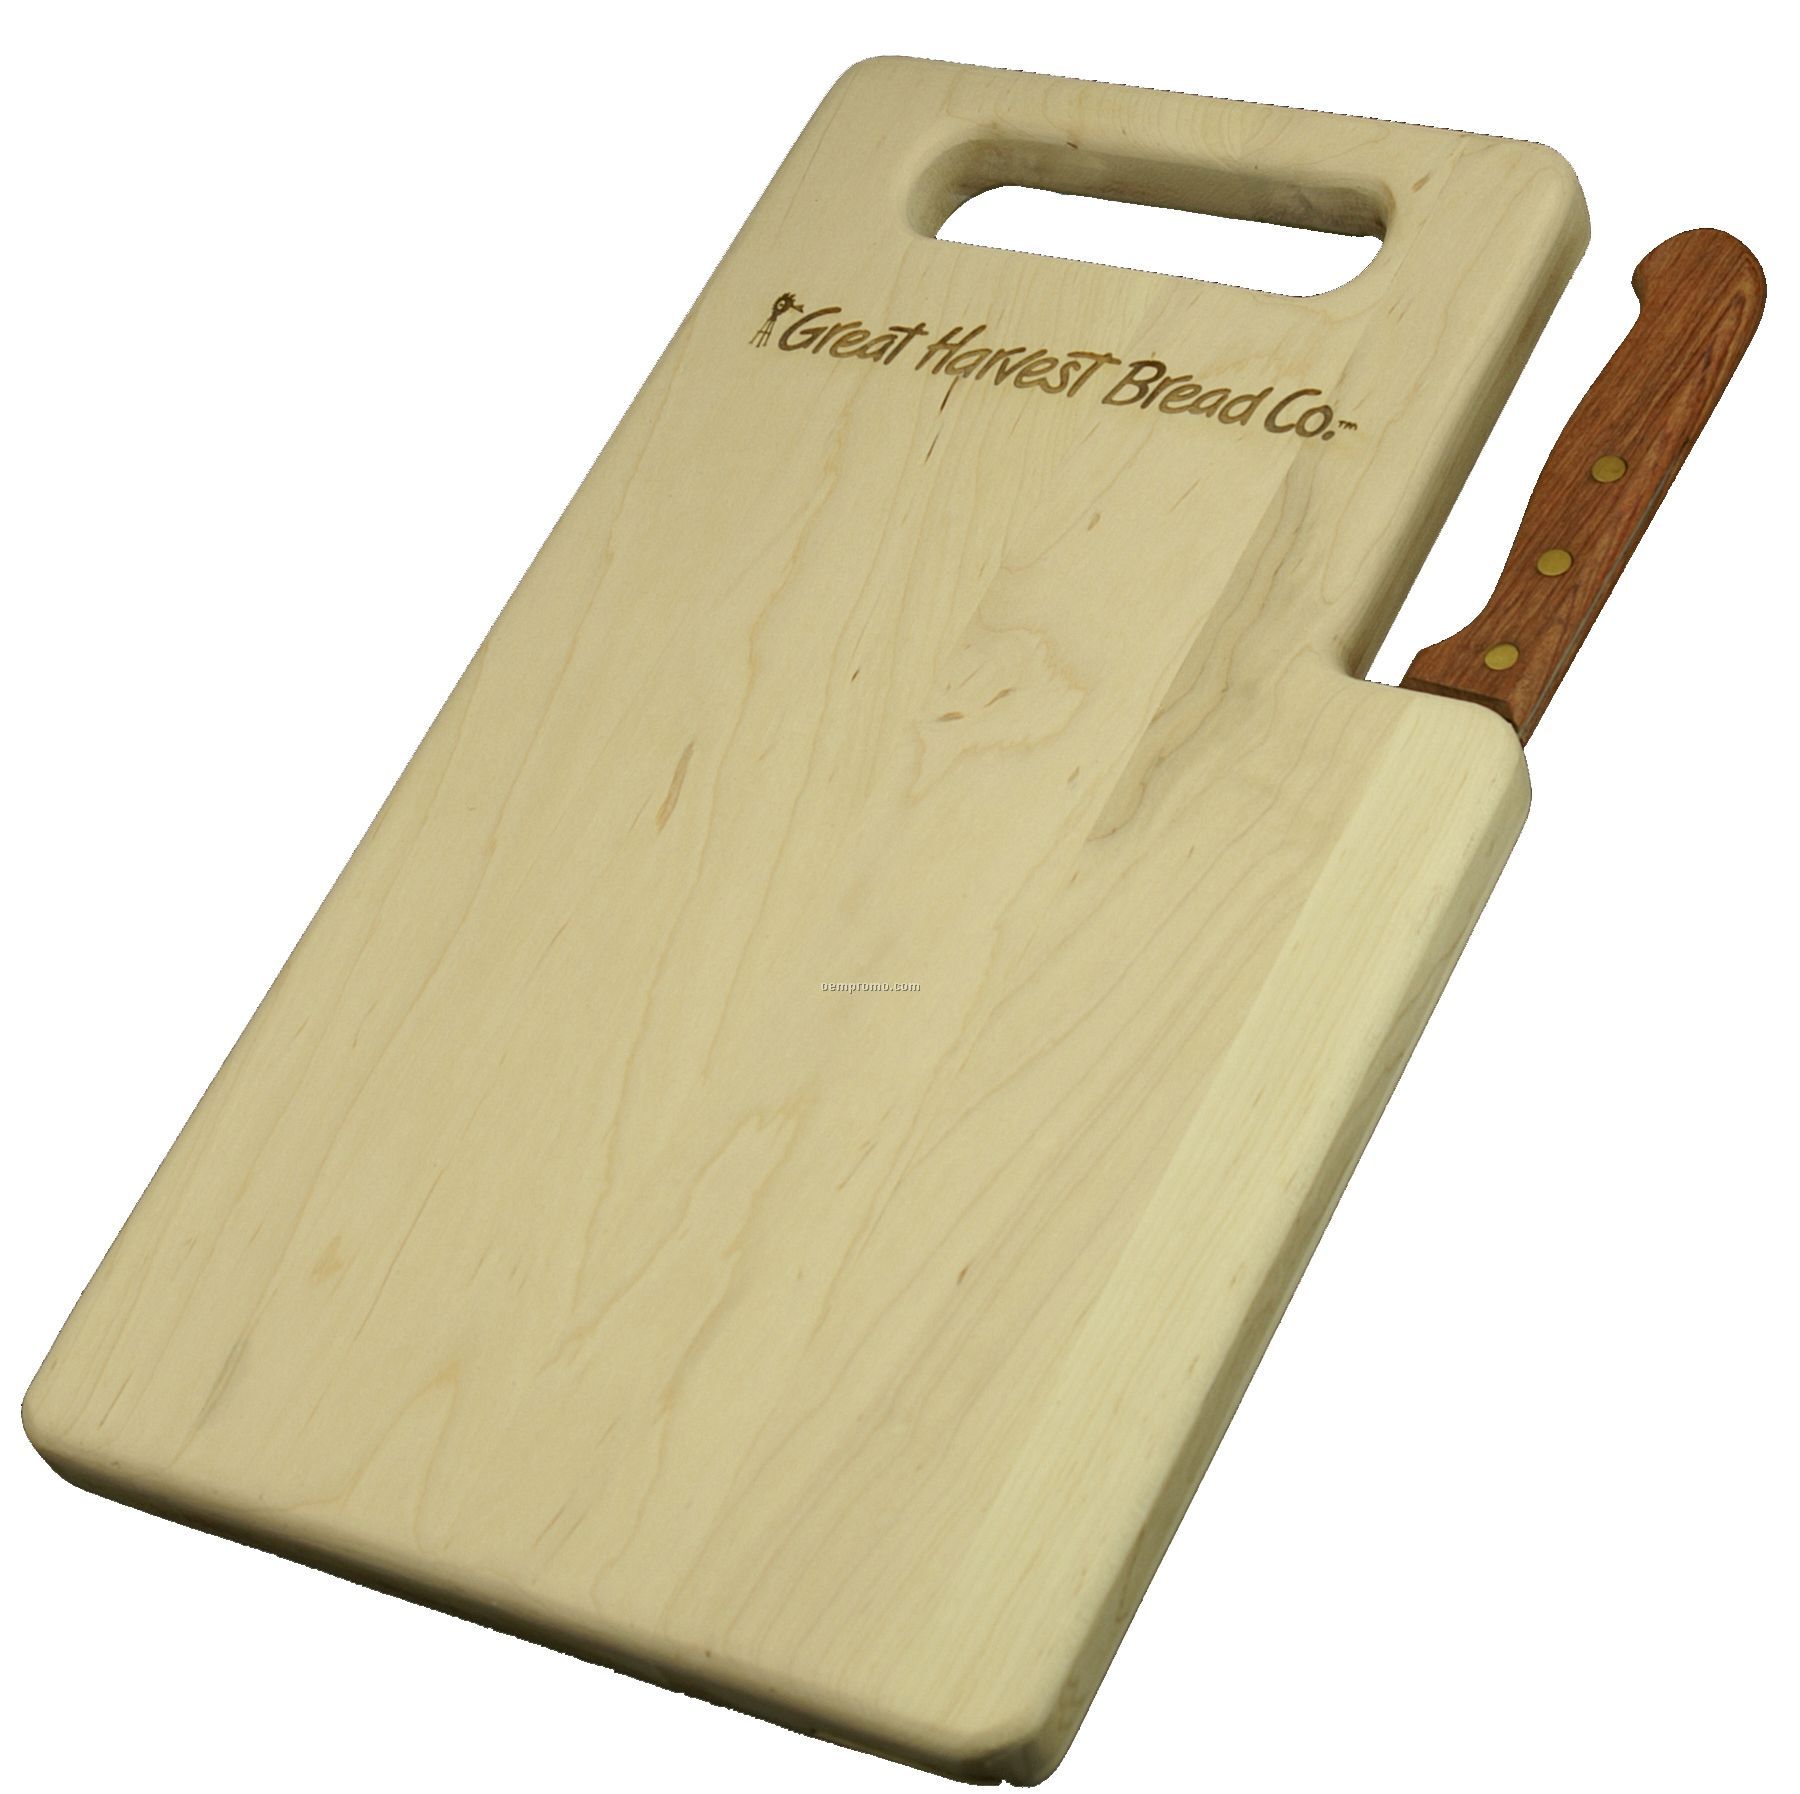 Chefs Board And Knife Set